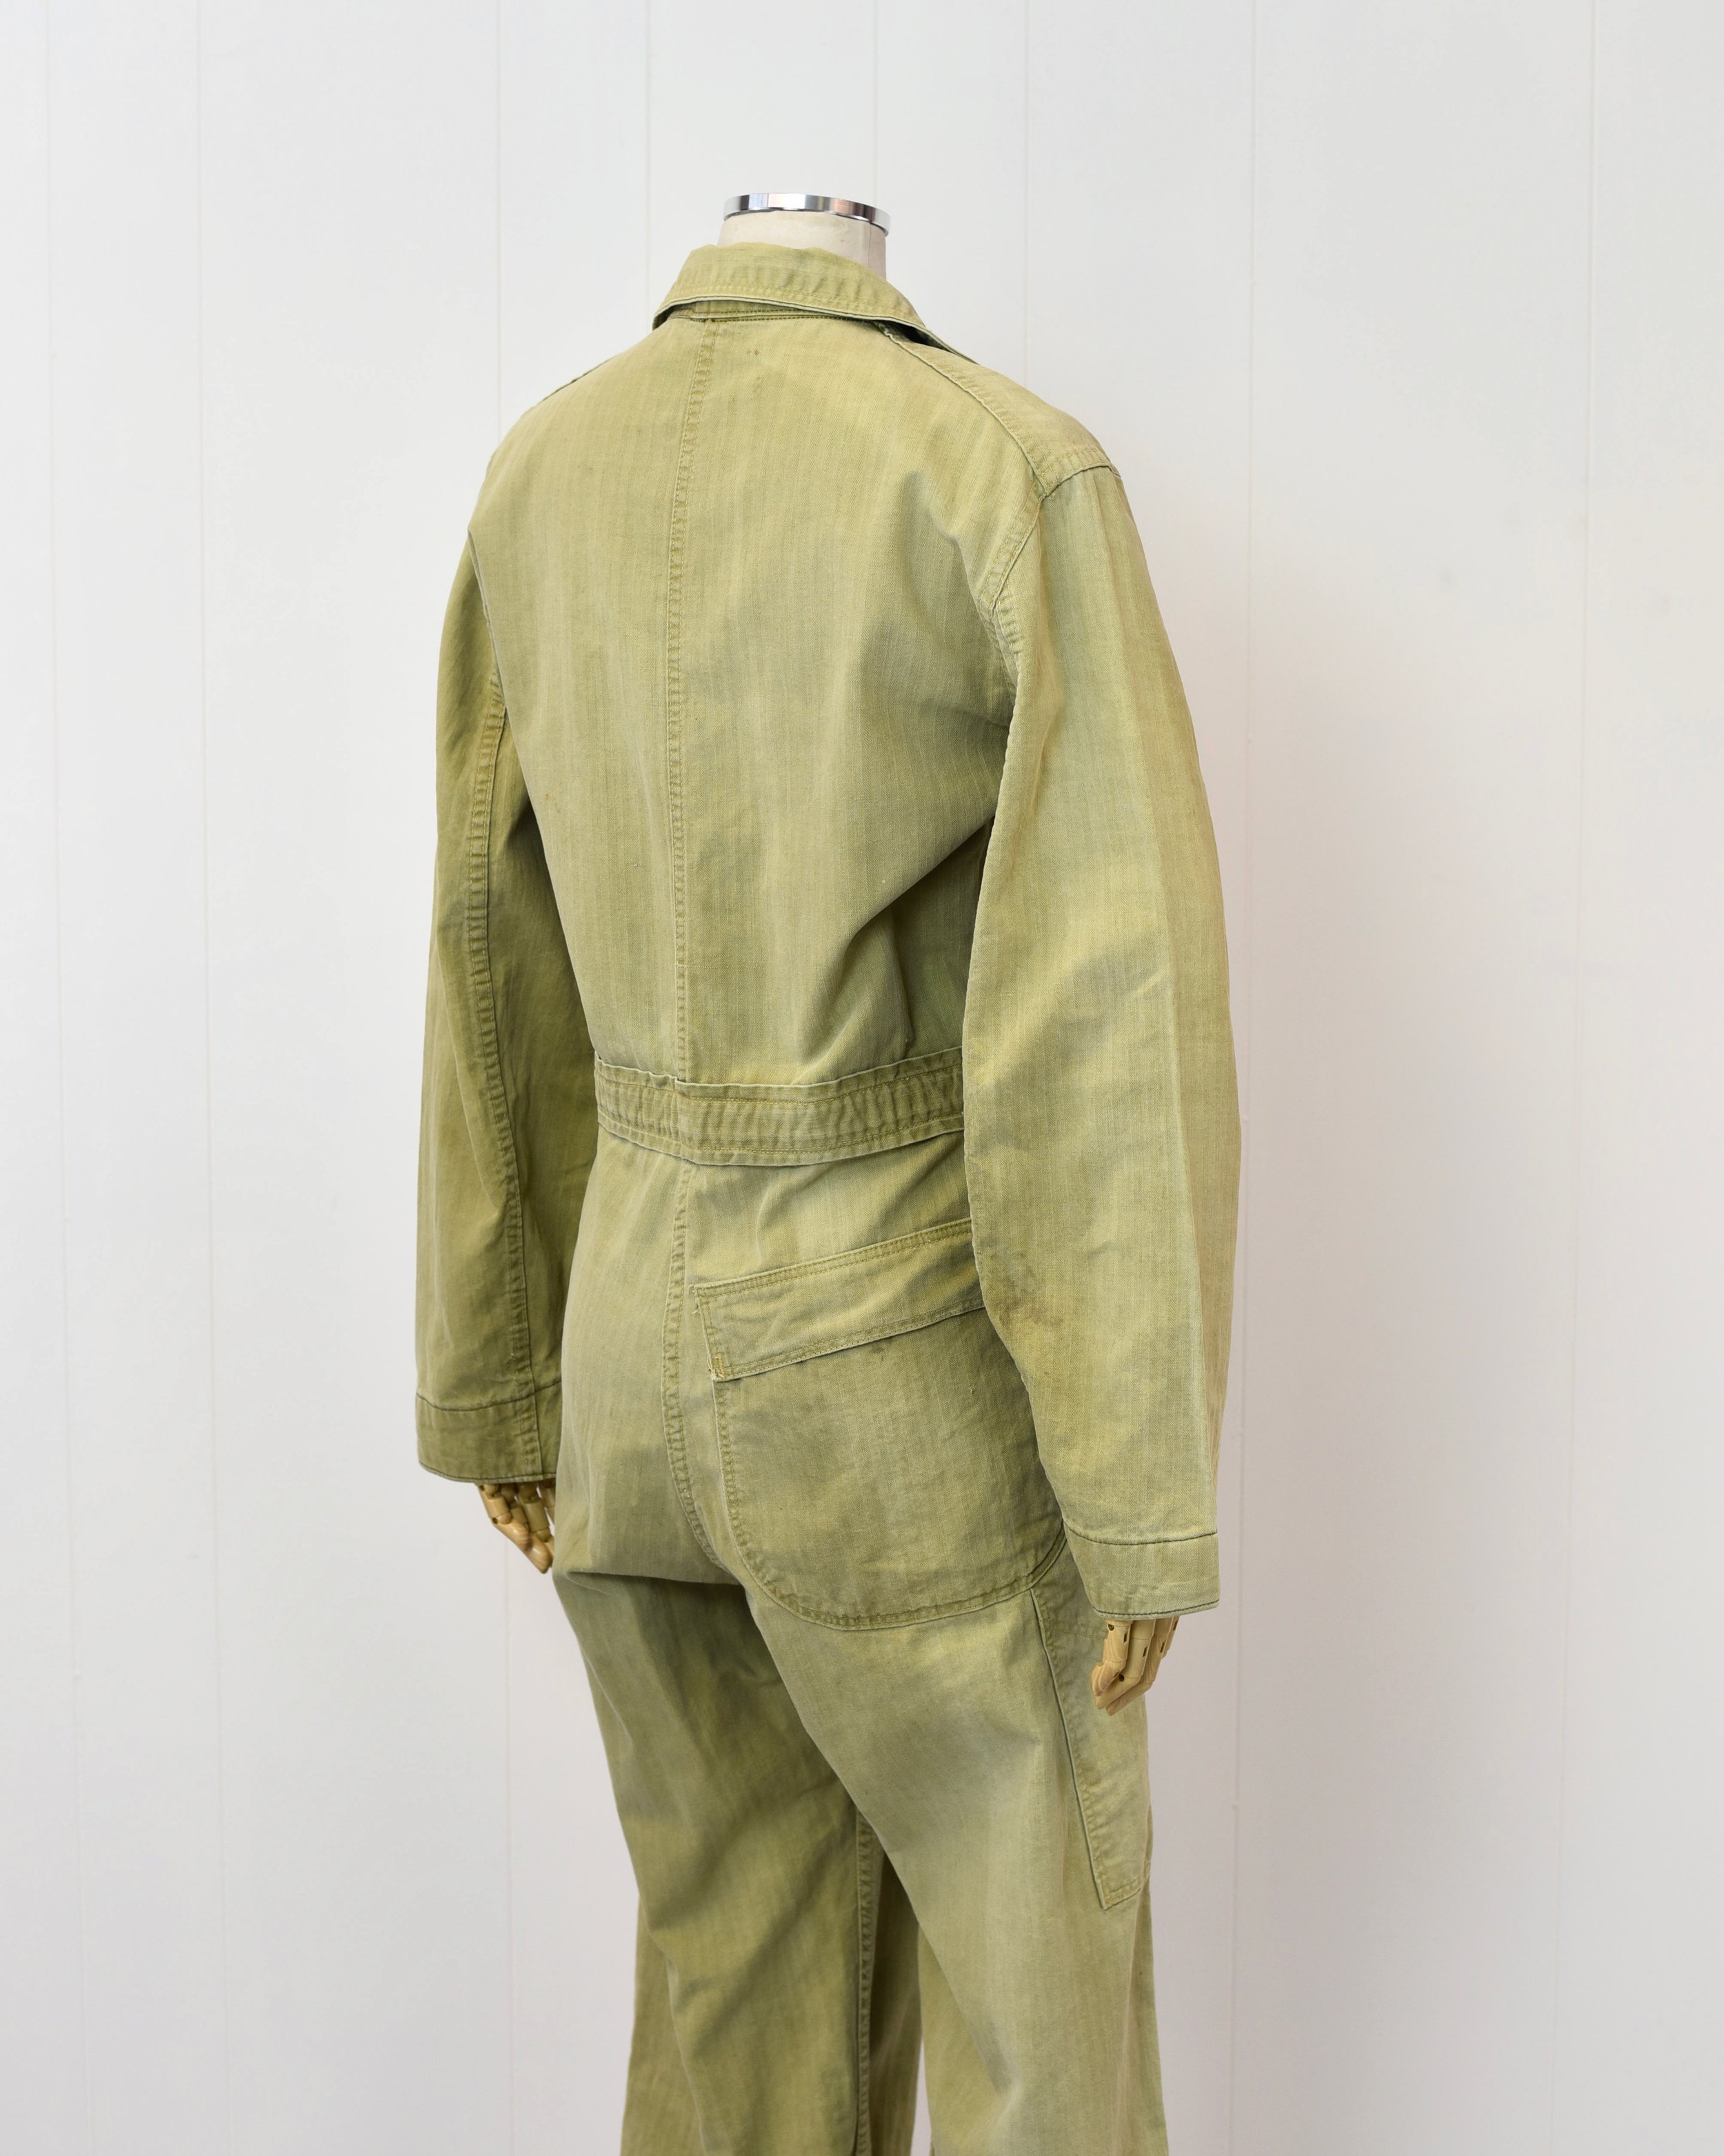 1950s Green Army Military Cotton Jumpsuit Coveralls — Canned Ham Vintage